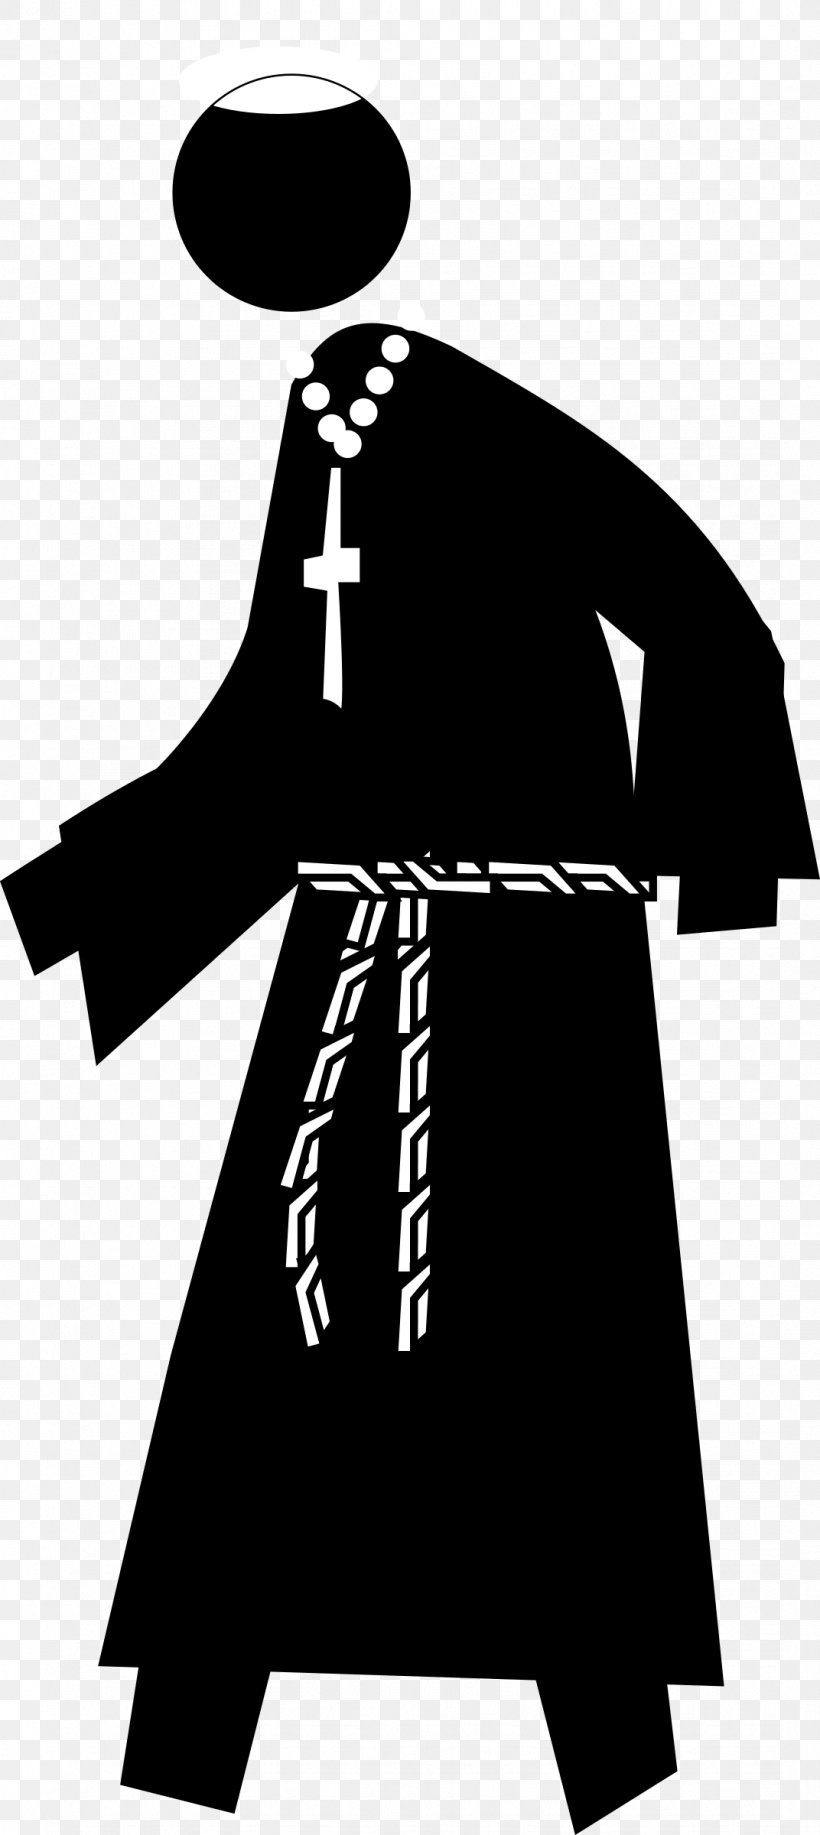 Monk Cartoon, PNG, 1072x2400px, Monk, Black, Black And White, Cartoon, Christianity Download Free